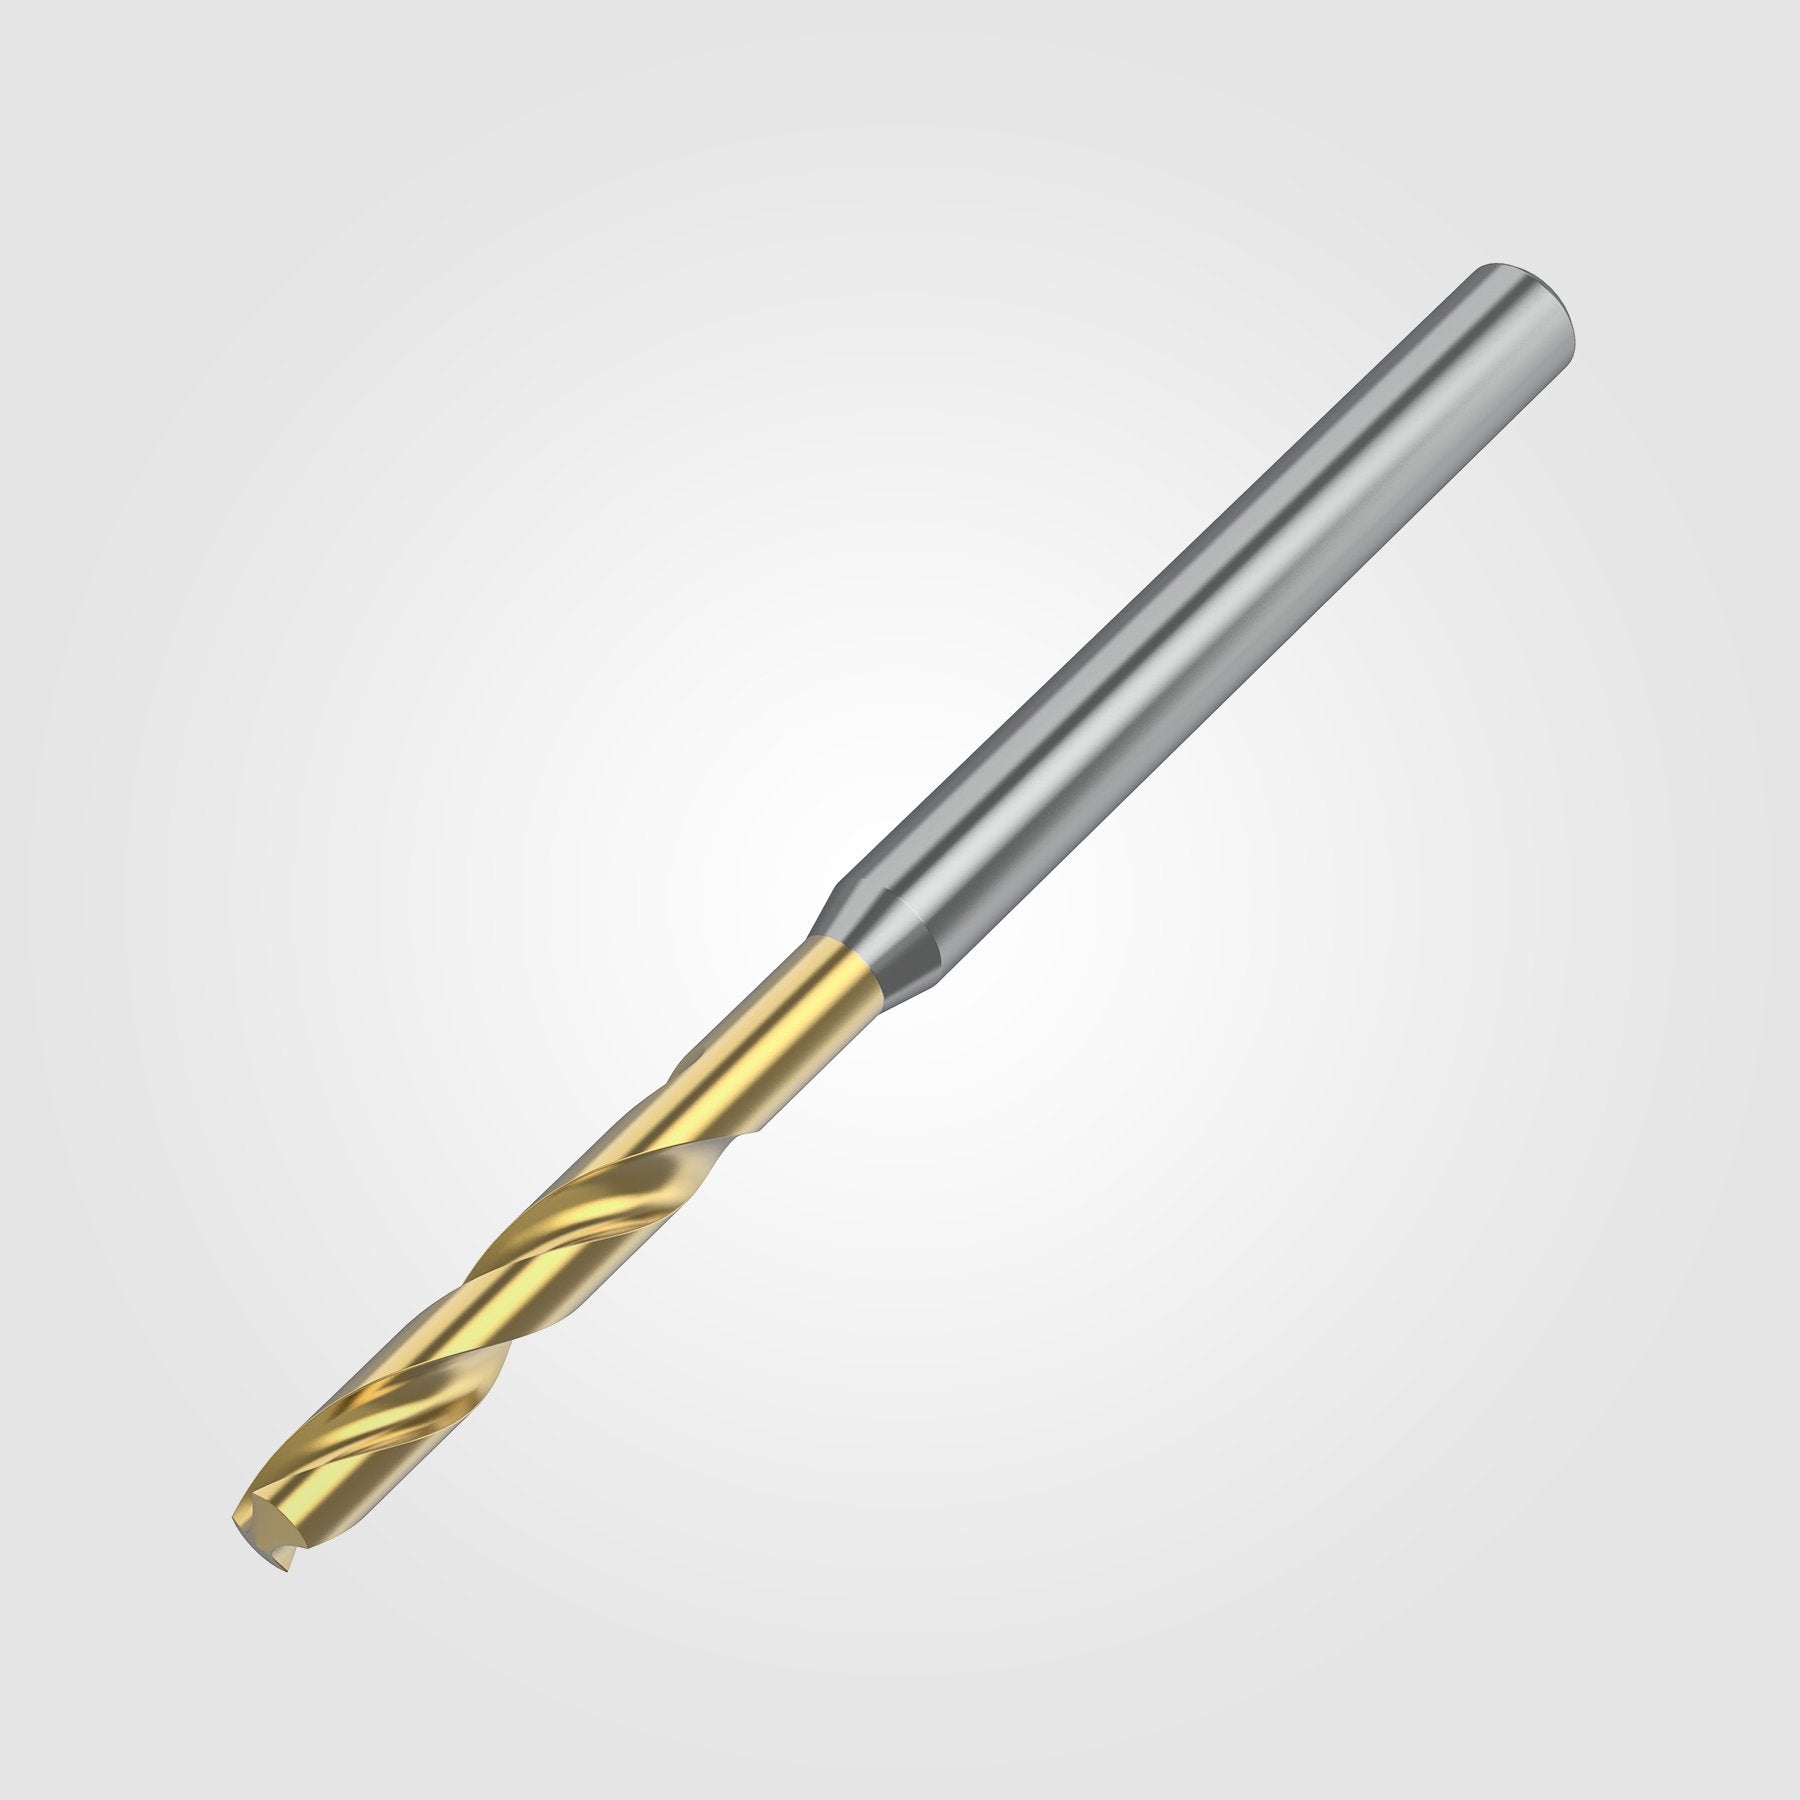 GOdrill (THROUGH COOLANT) | 13.5mm / .5315" / 3xD | SOLID CARBIDE DRILL | 4151246